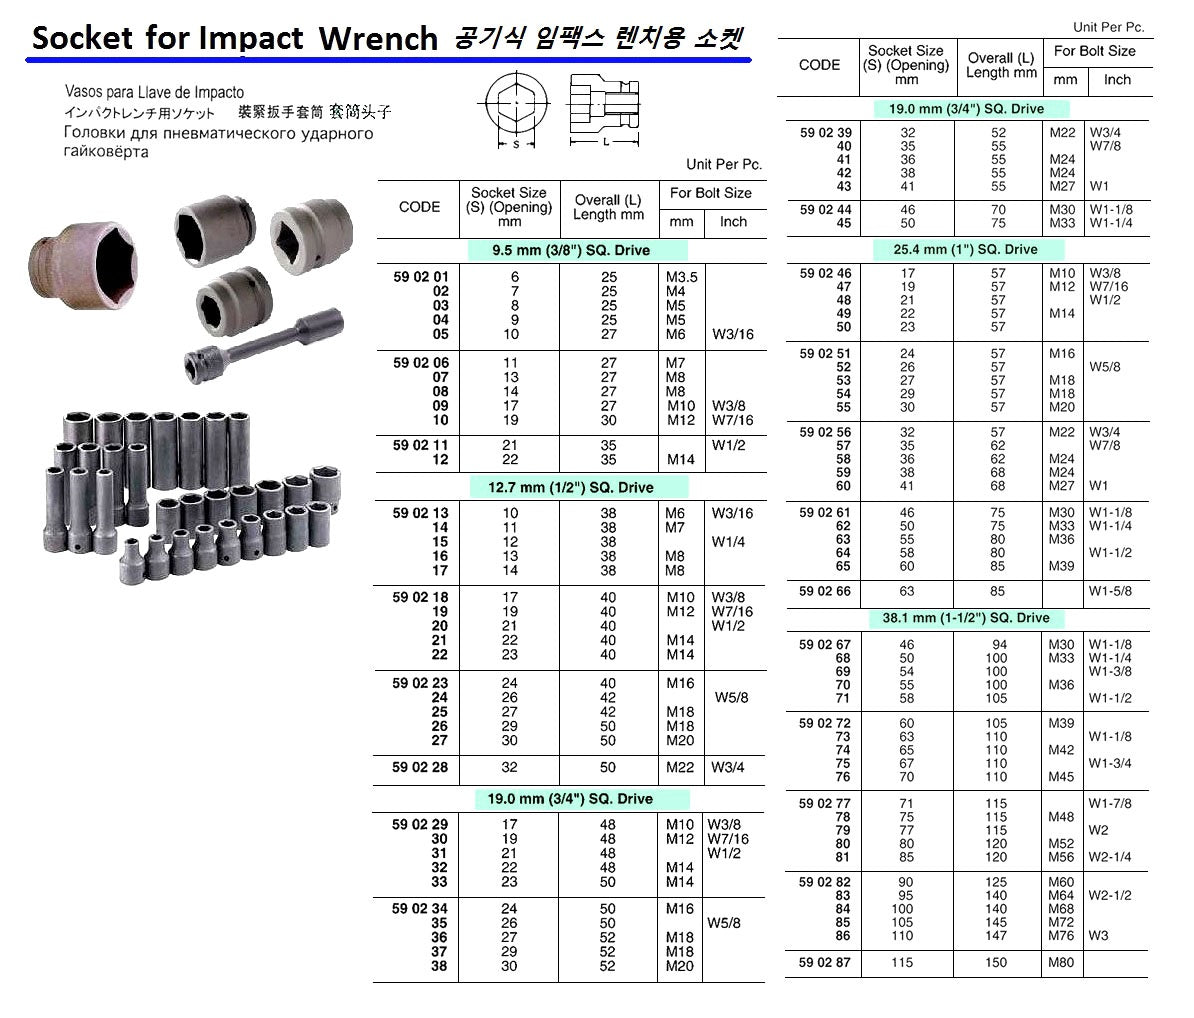 590208-SOCKET FOR IMPACT WRENCH, 9.5MM/SQ DR. X 14MM